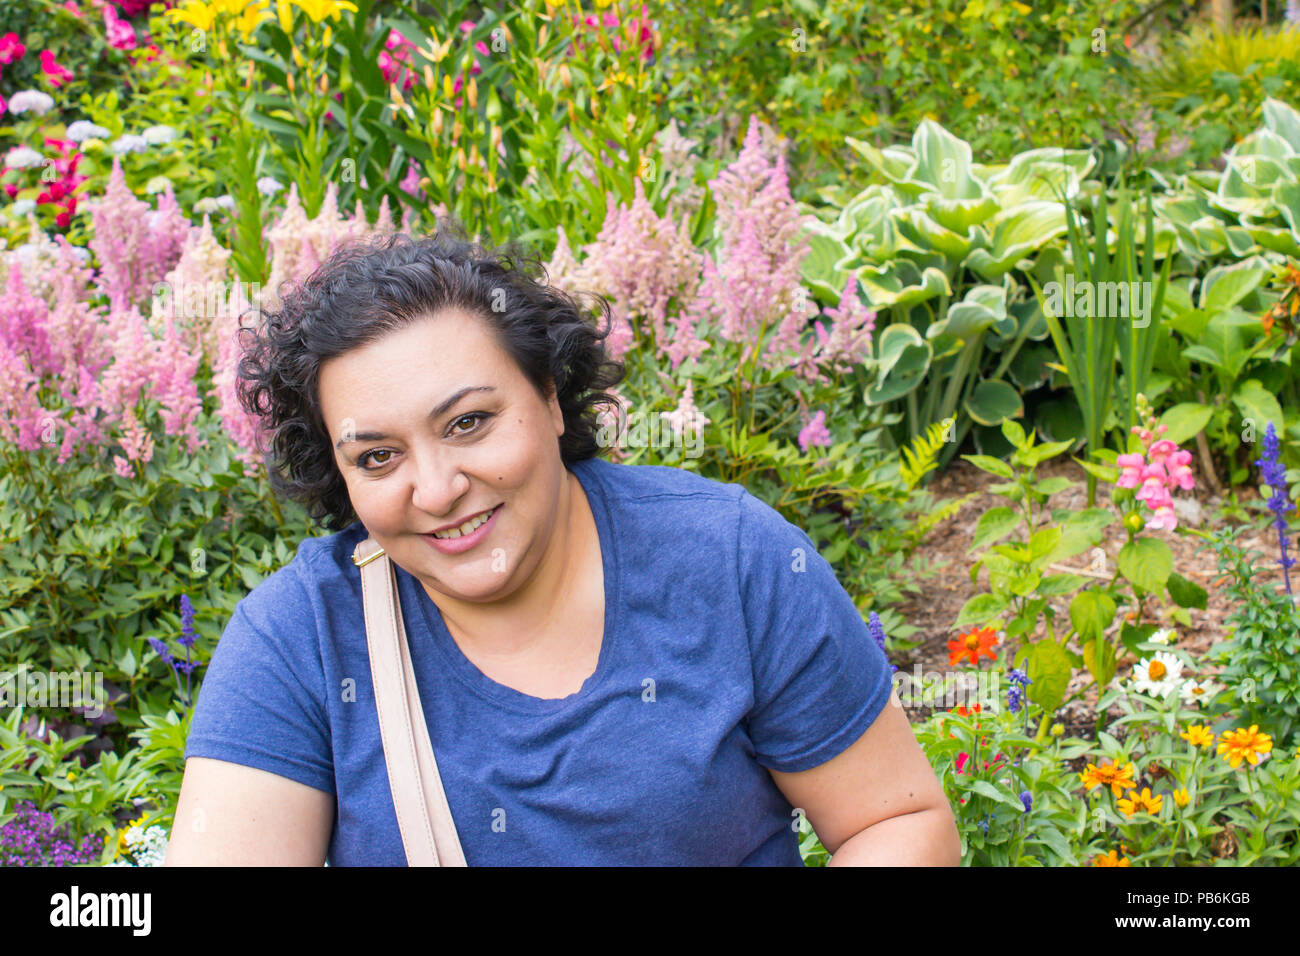 head and shoulders shot of a woman standing in front of pink flowers in a garden Stock Photo